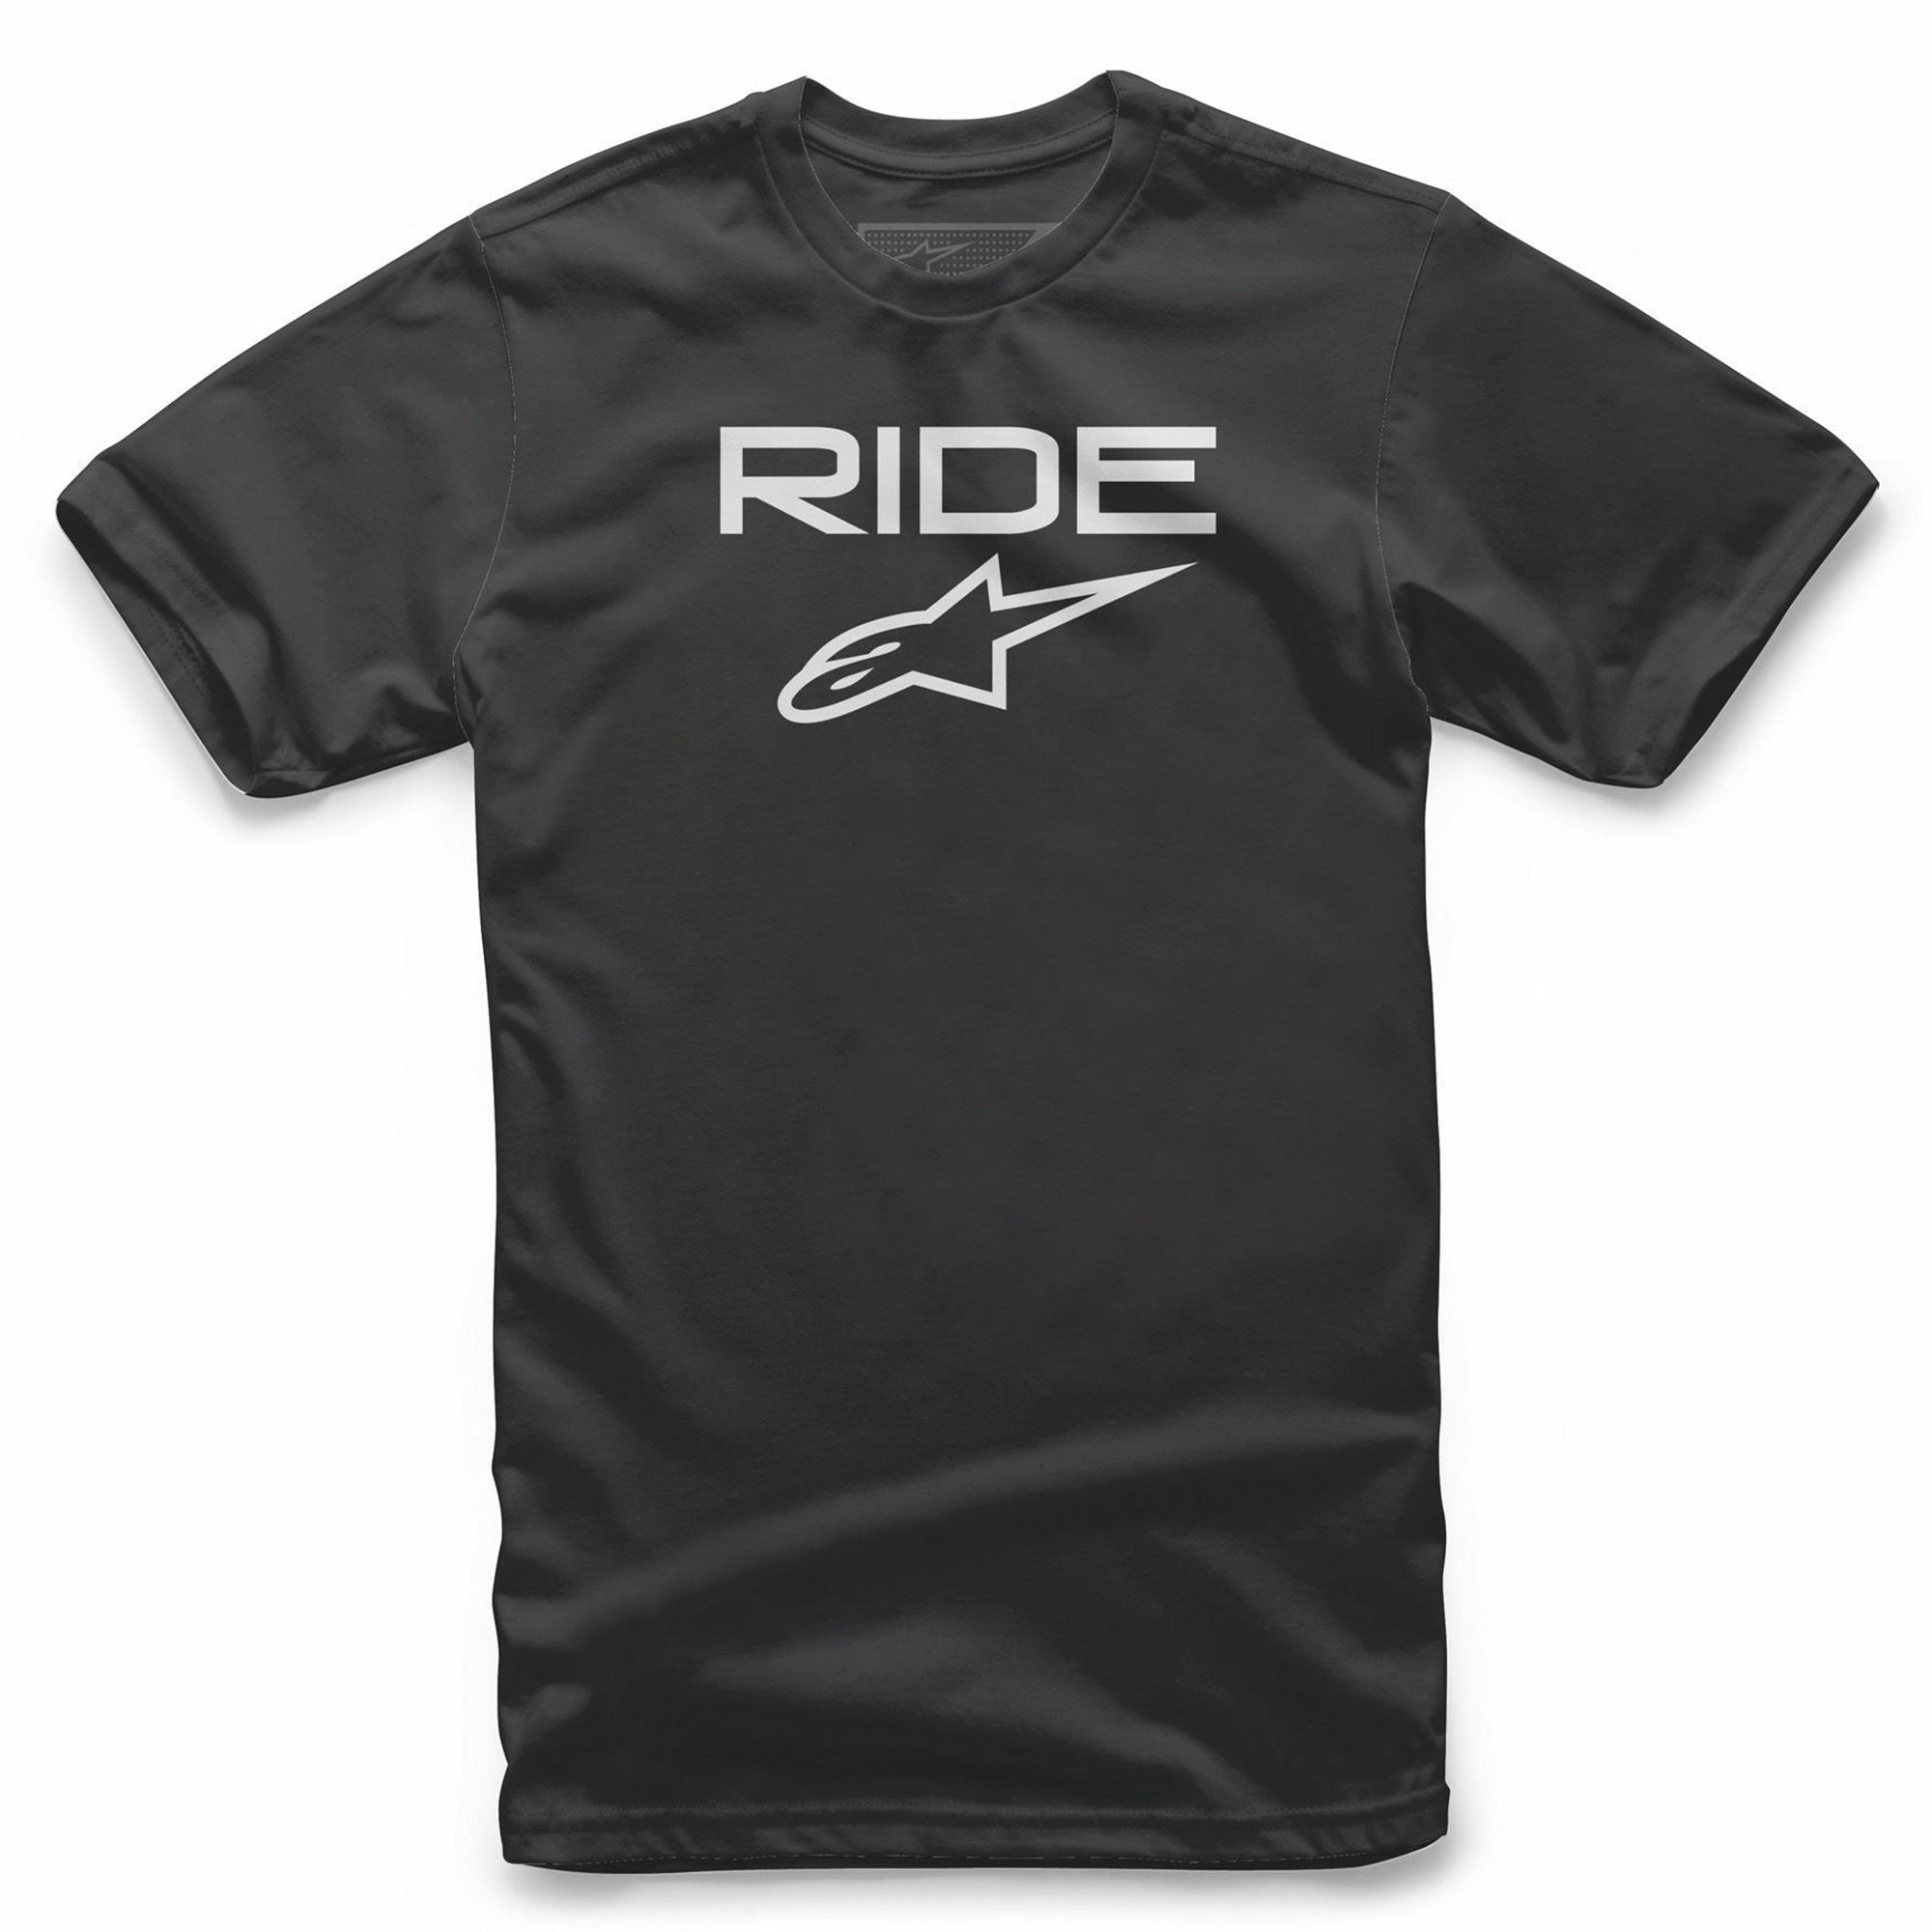 Juvy Ride 2.0 Tee